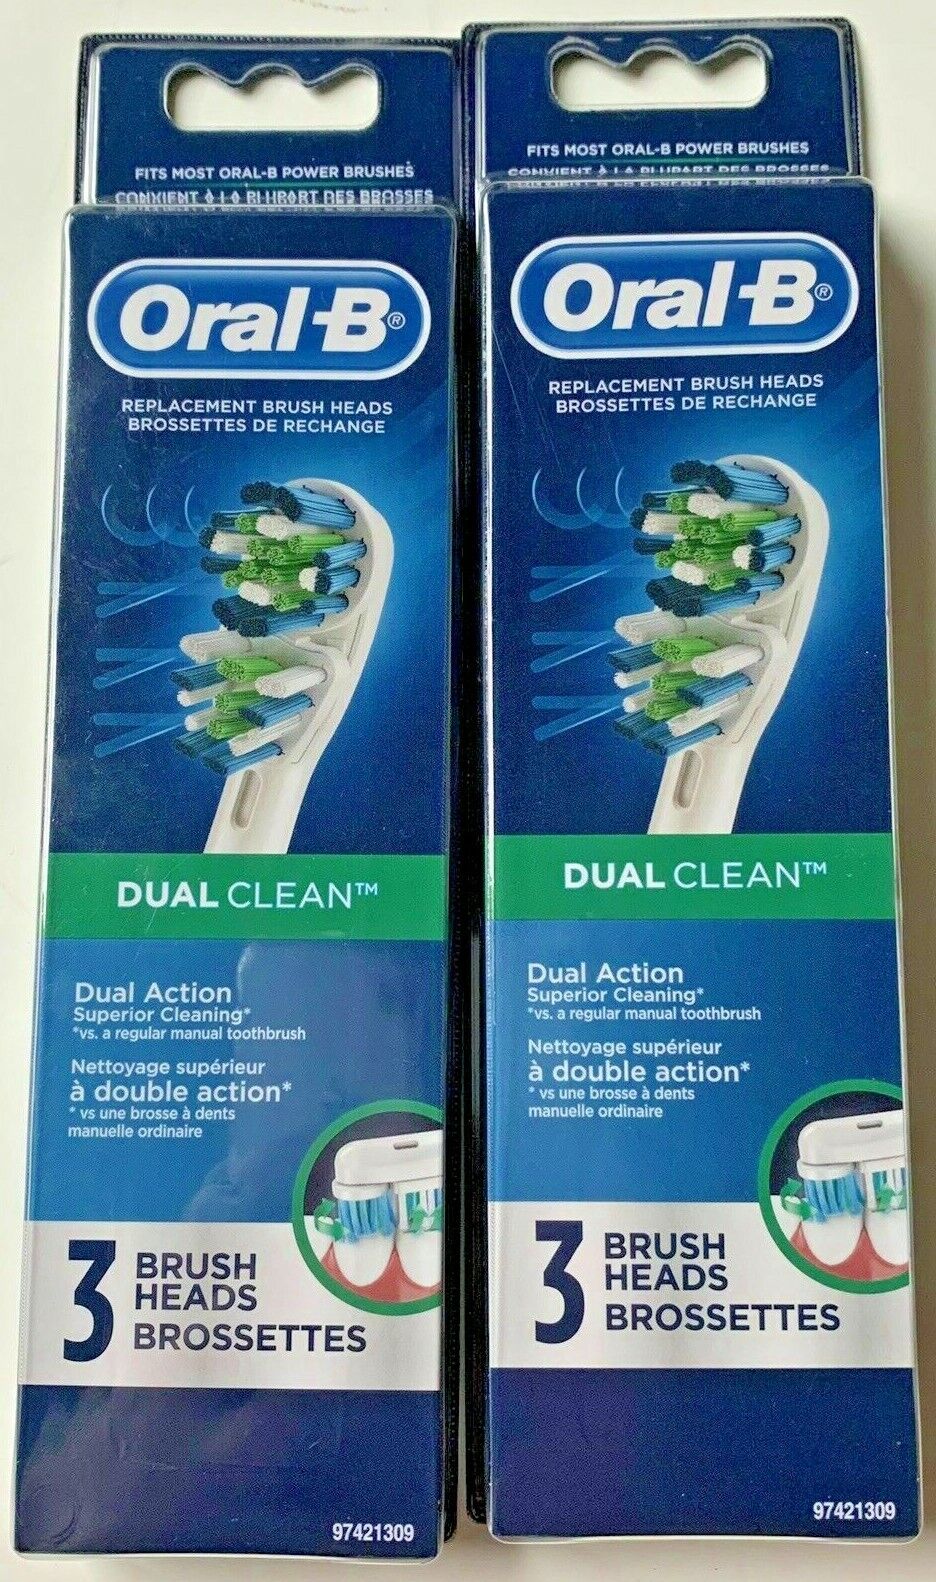 6 ORAL-B Dual Clean Replacement Toothbrush Brush Heads Triumph Professional Care